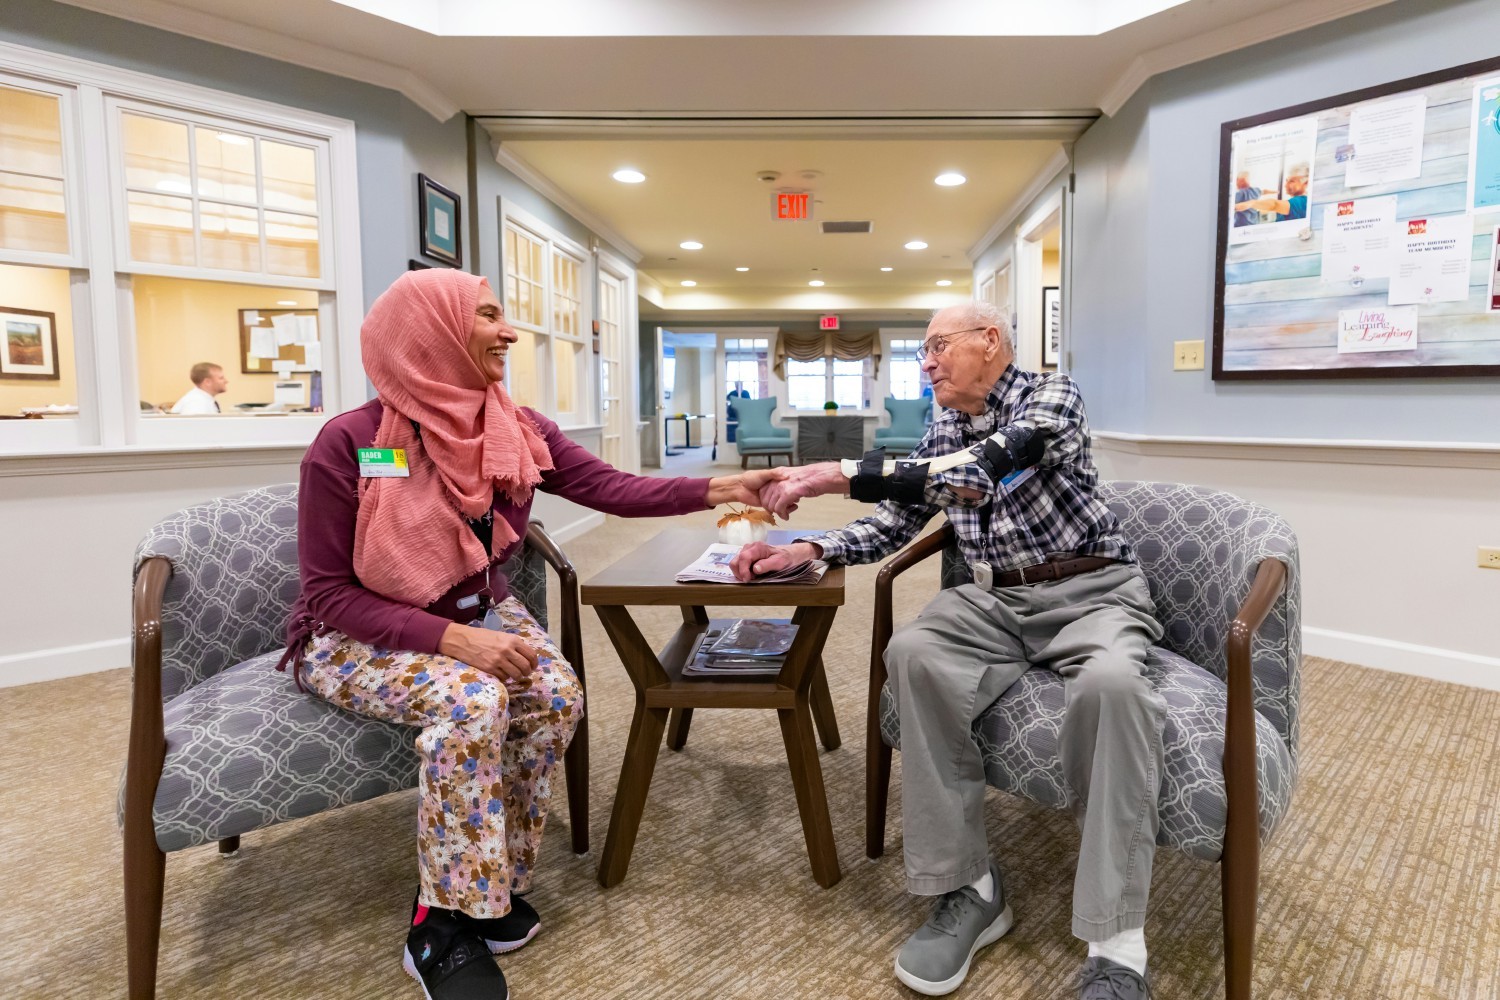 Badar, an Engage Life Program Instructor at Atria Park of Glen Ellyn, spends time with one of the residents. 